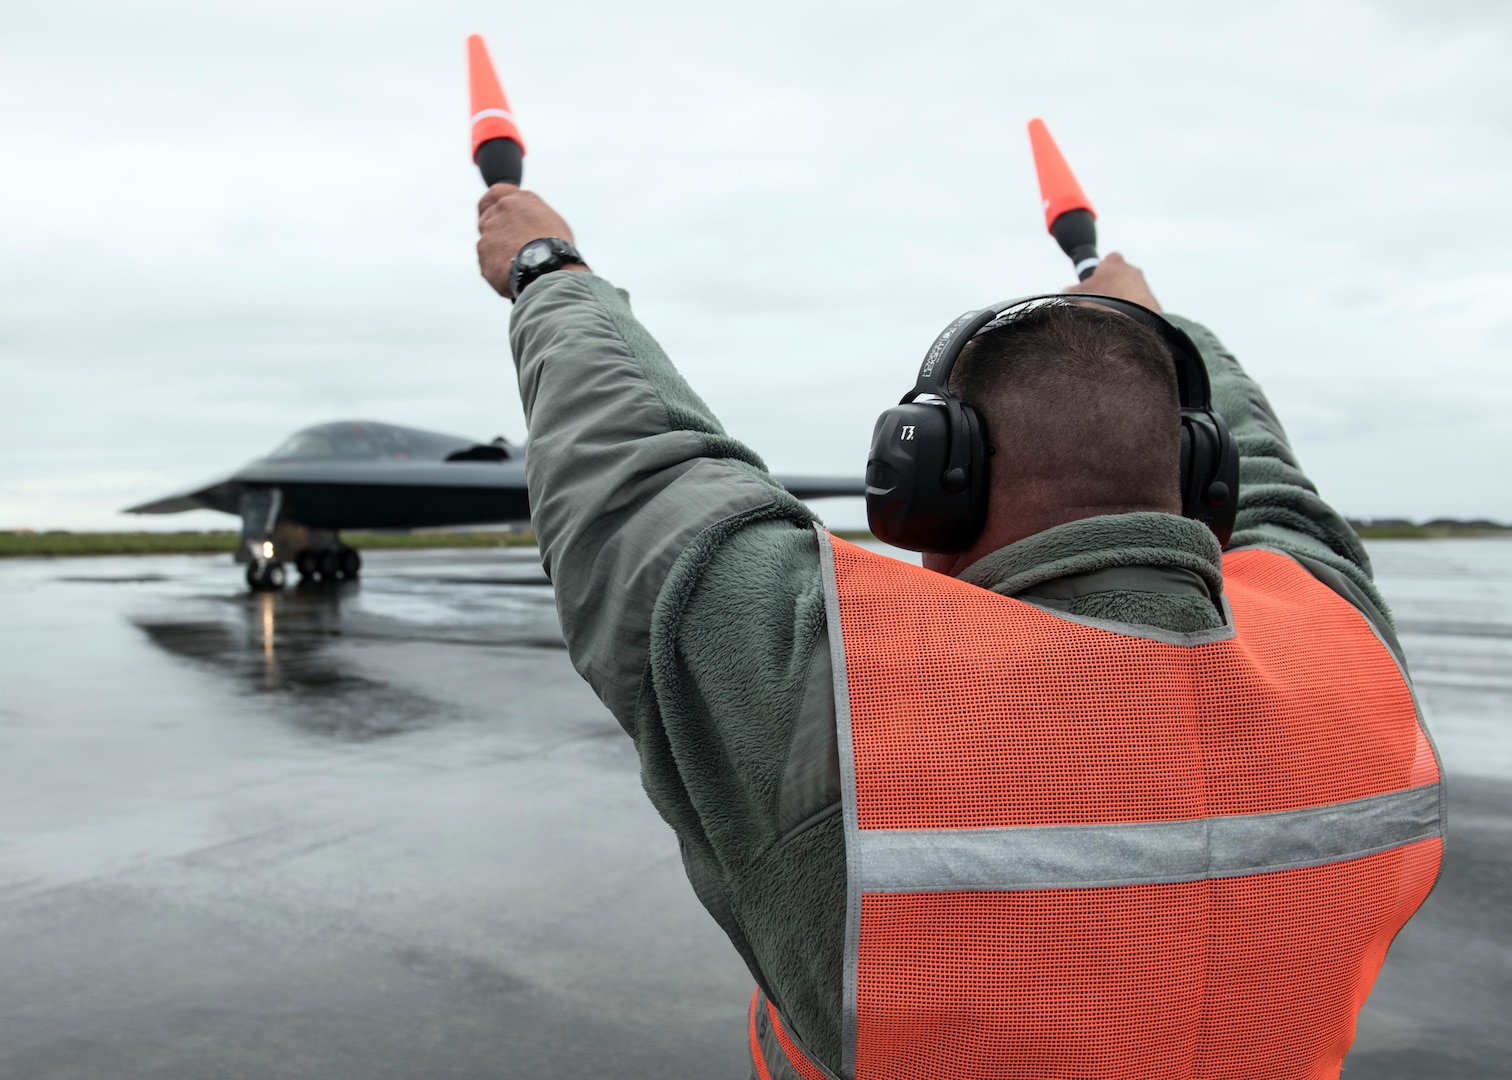 Master Sgt. Scott Smith, a hydraulics shop chief assigned to the 131st Maintenance Squadron Group, marshals a B-2 Spirit Stealth Bomber at Naval Air Station Keflavik, Iceland, August 28, 2019. This is the B-2s first time ever landing in Iceland. While in Iceland Airmen from Whiteman conducted hot-pit refueling, which is a method of refueling an aircraft without shutting down the engines. Training with partners, allied nations and other U.S. Air Force units contributes to our readiness and enables us to build enduring and strategic relationships necessary to confront a broad range of global challenges.